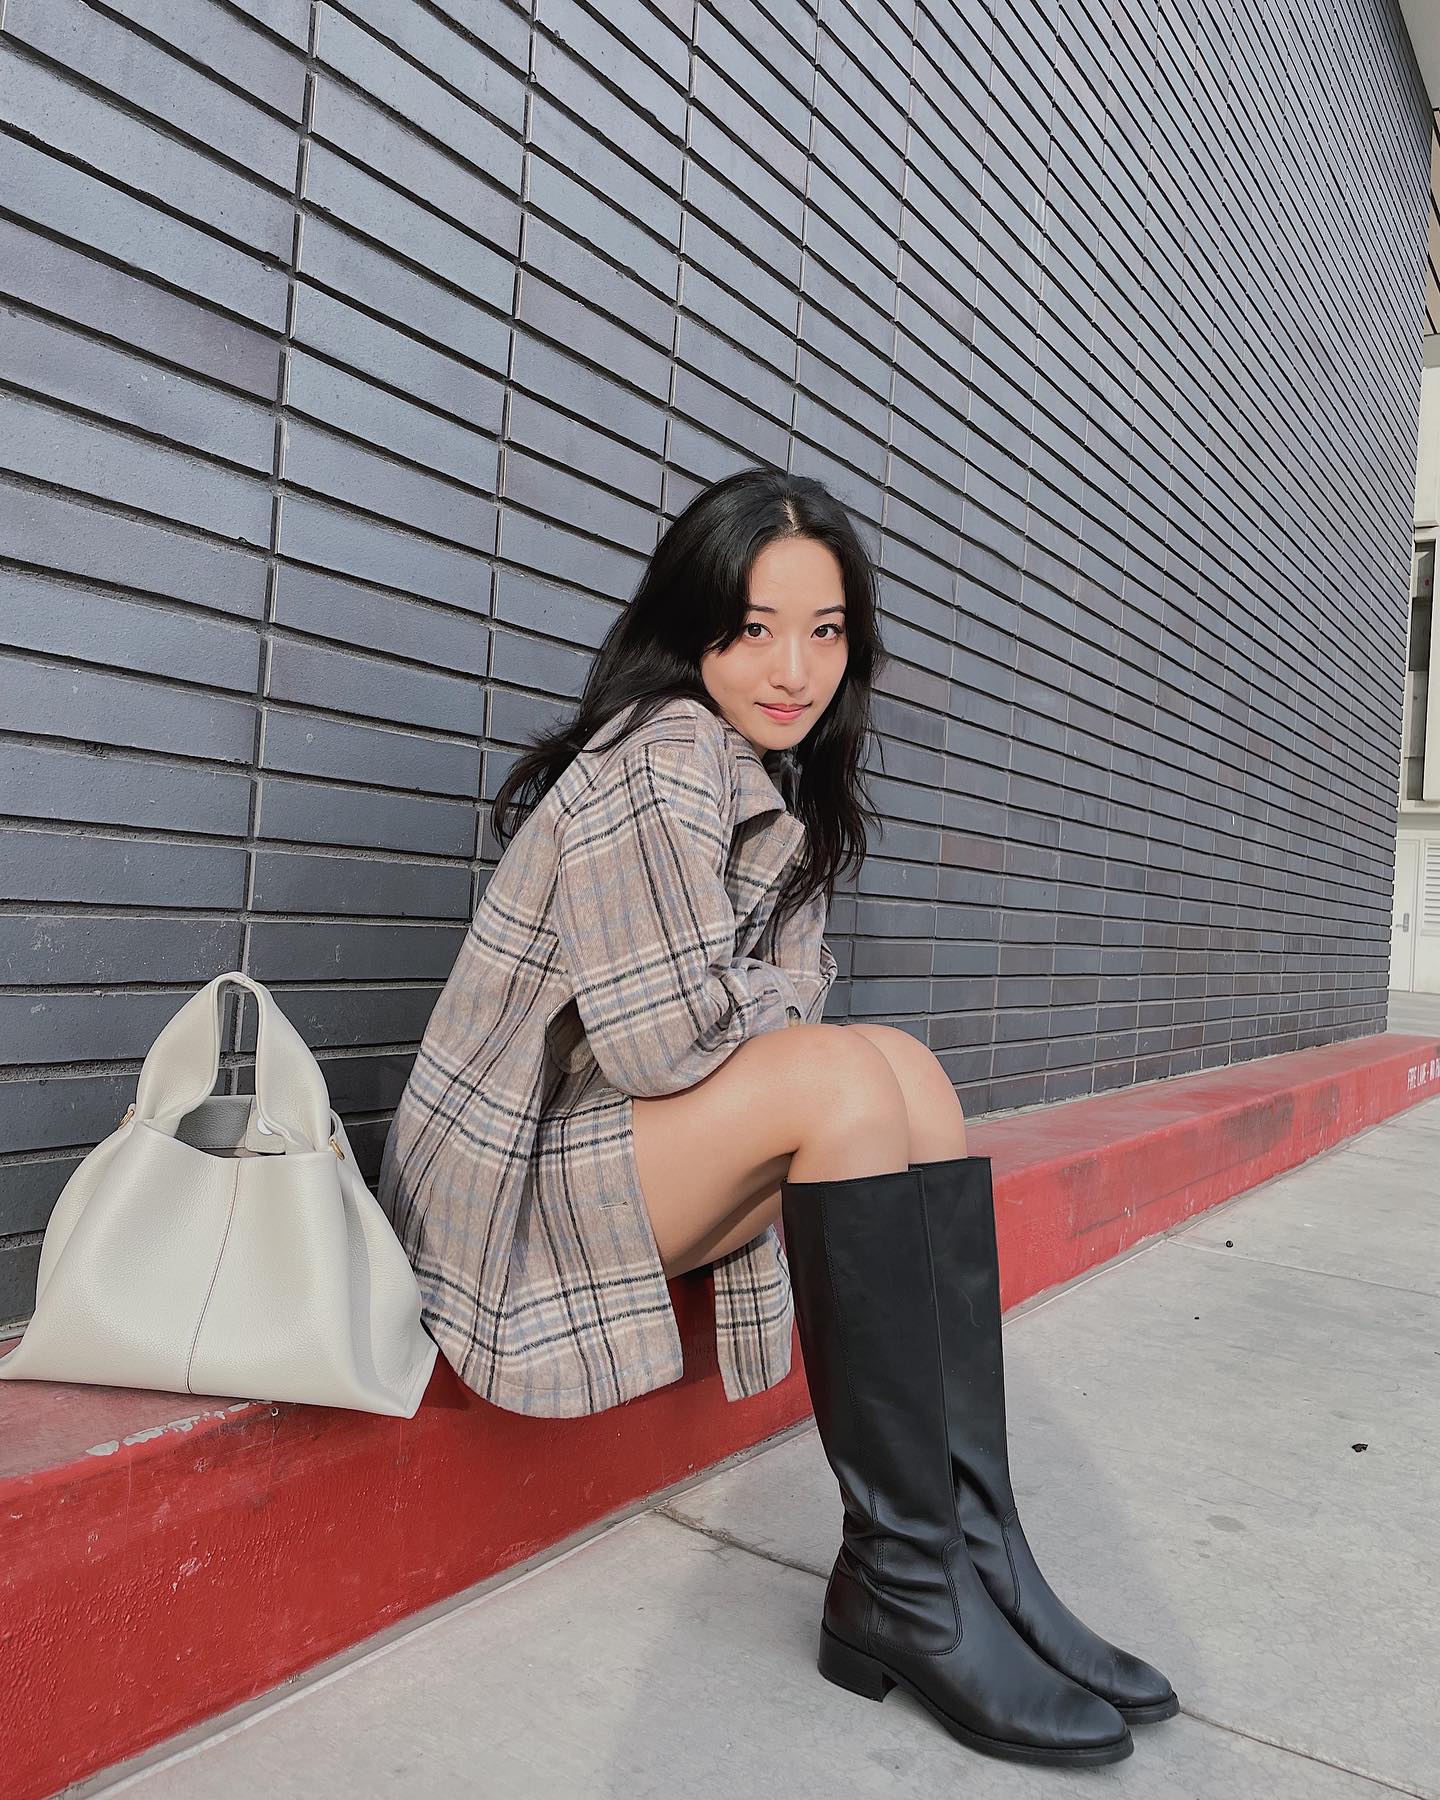 oversized shirt and boots